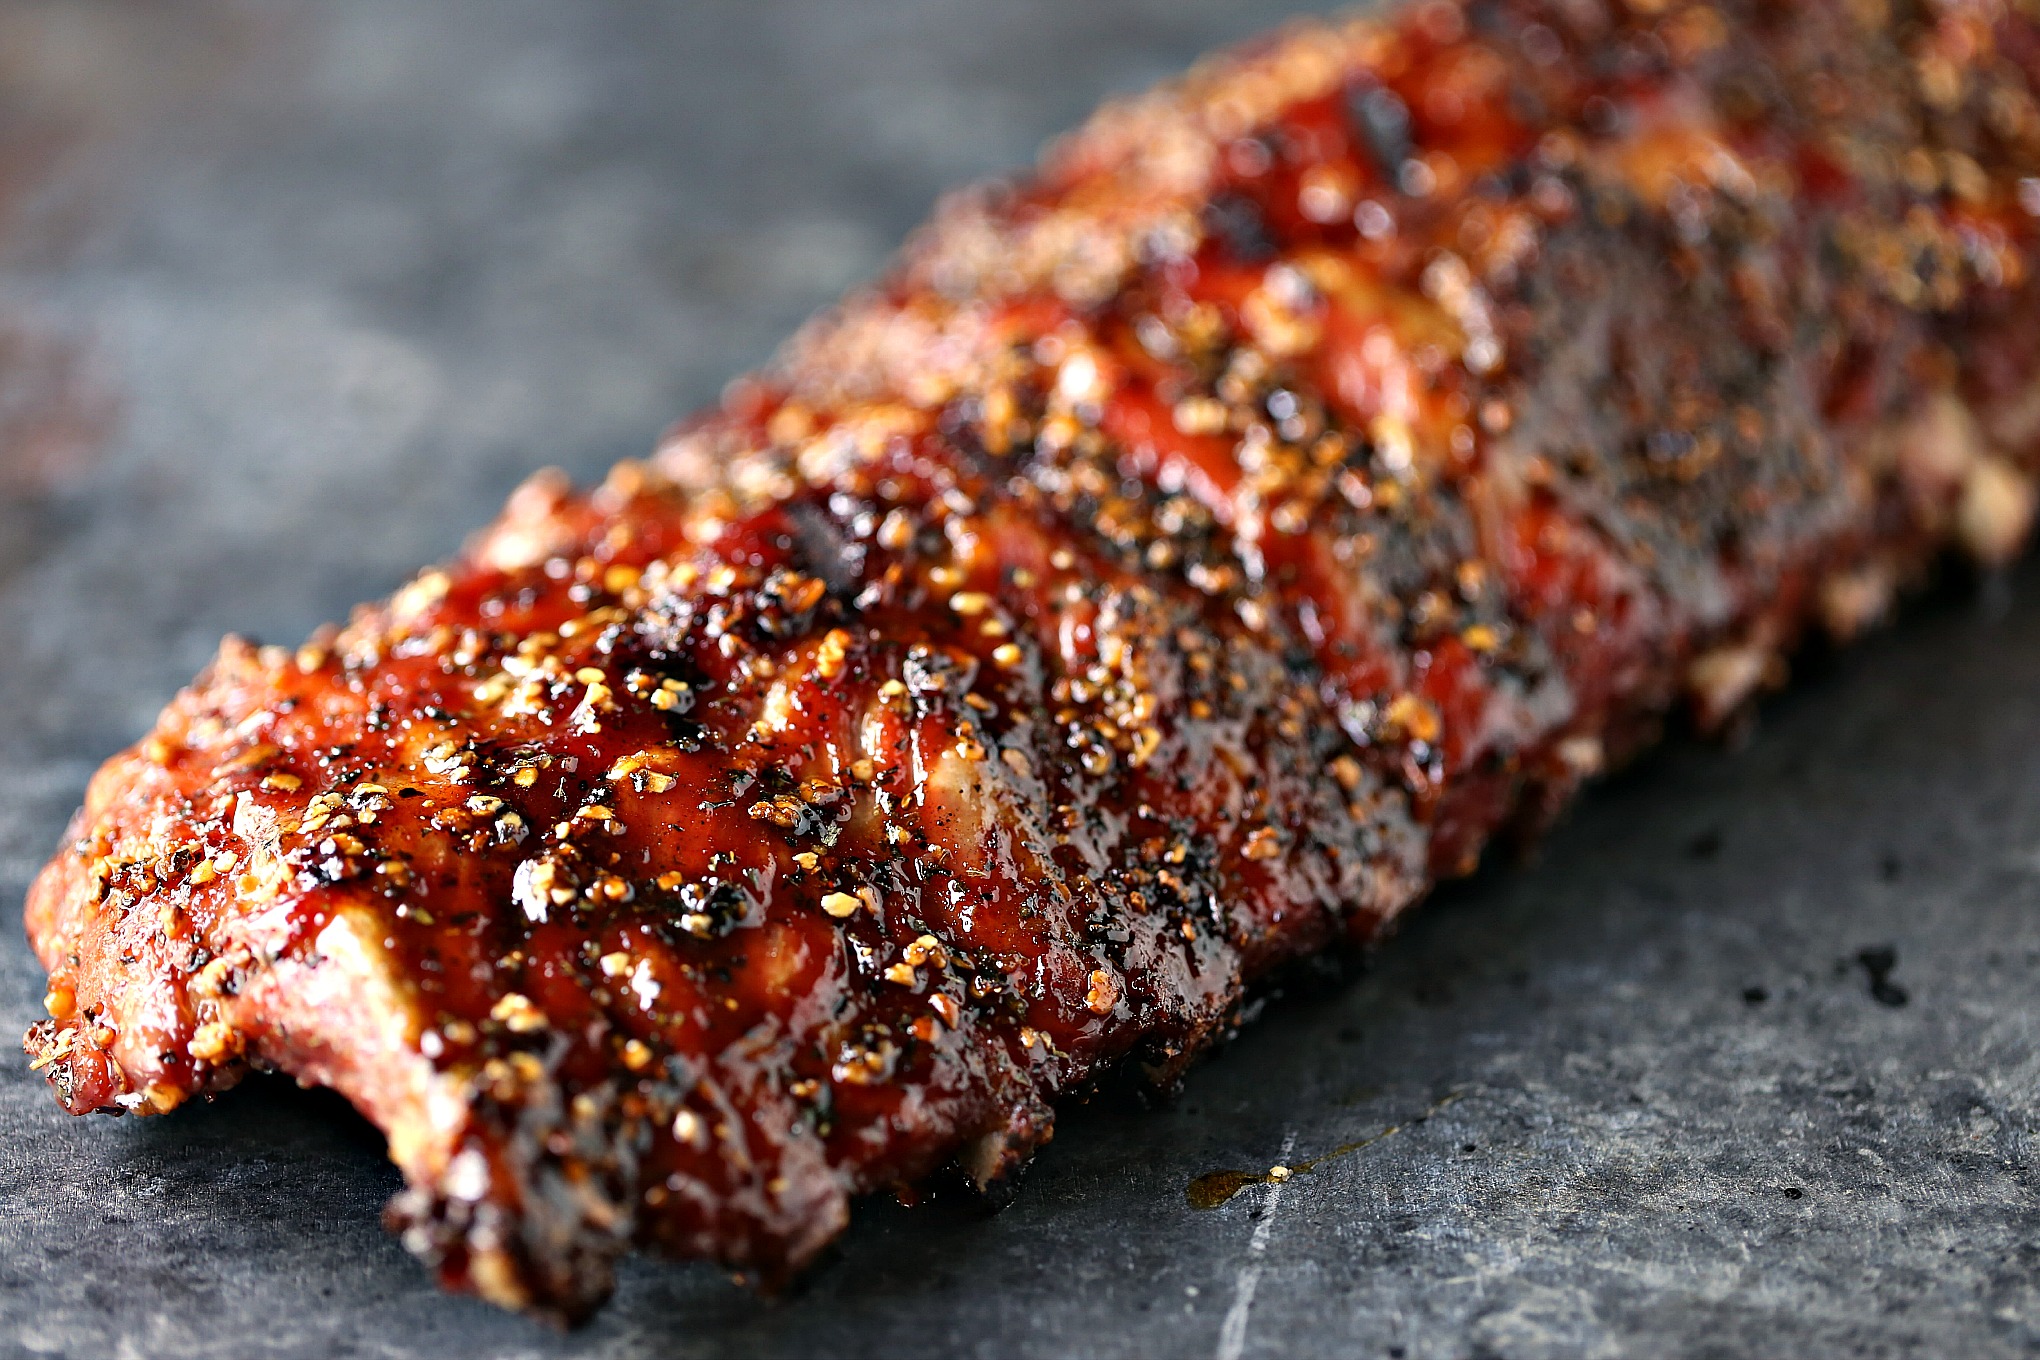 Easy Grilled Honey-Garlic Ribs from kissmysmoke.com- This is a simple, no-fuss recipe for honey garlic ribs that will make your taste buds do the happy dance. You can easily customize this to your own taste and heat preferences. Make this recipe today!